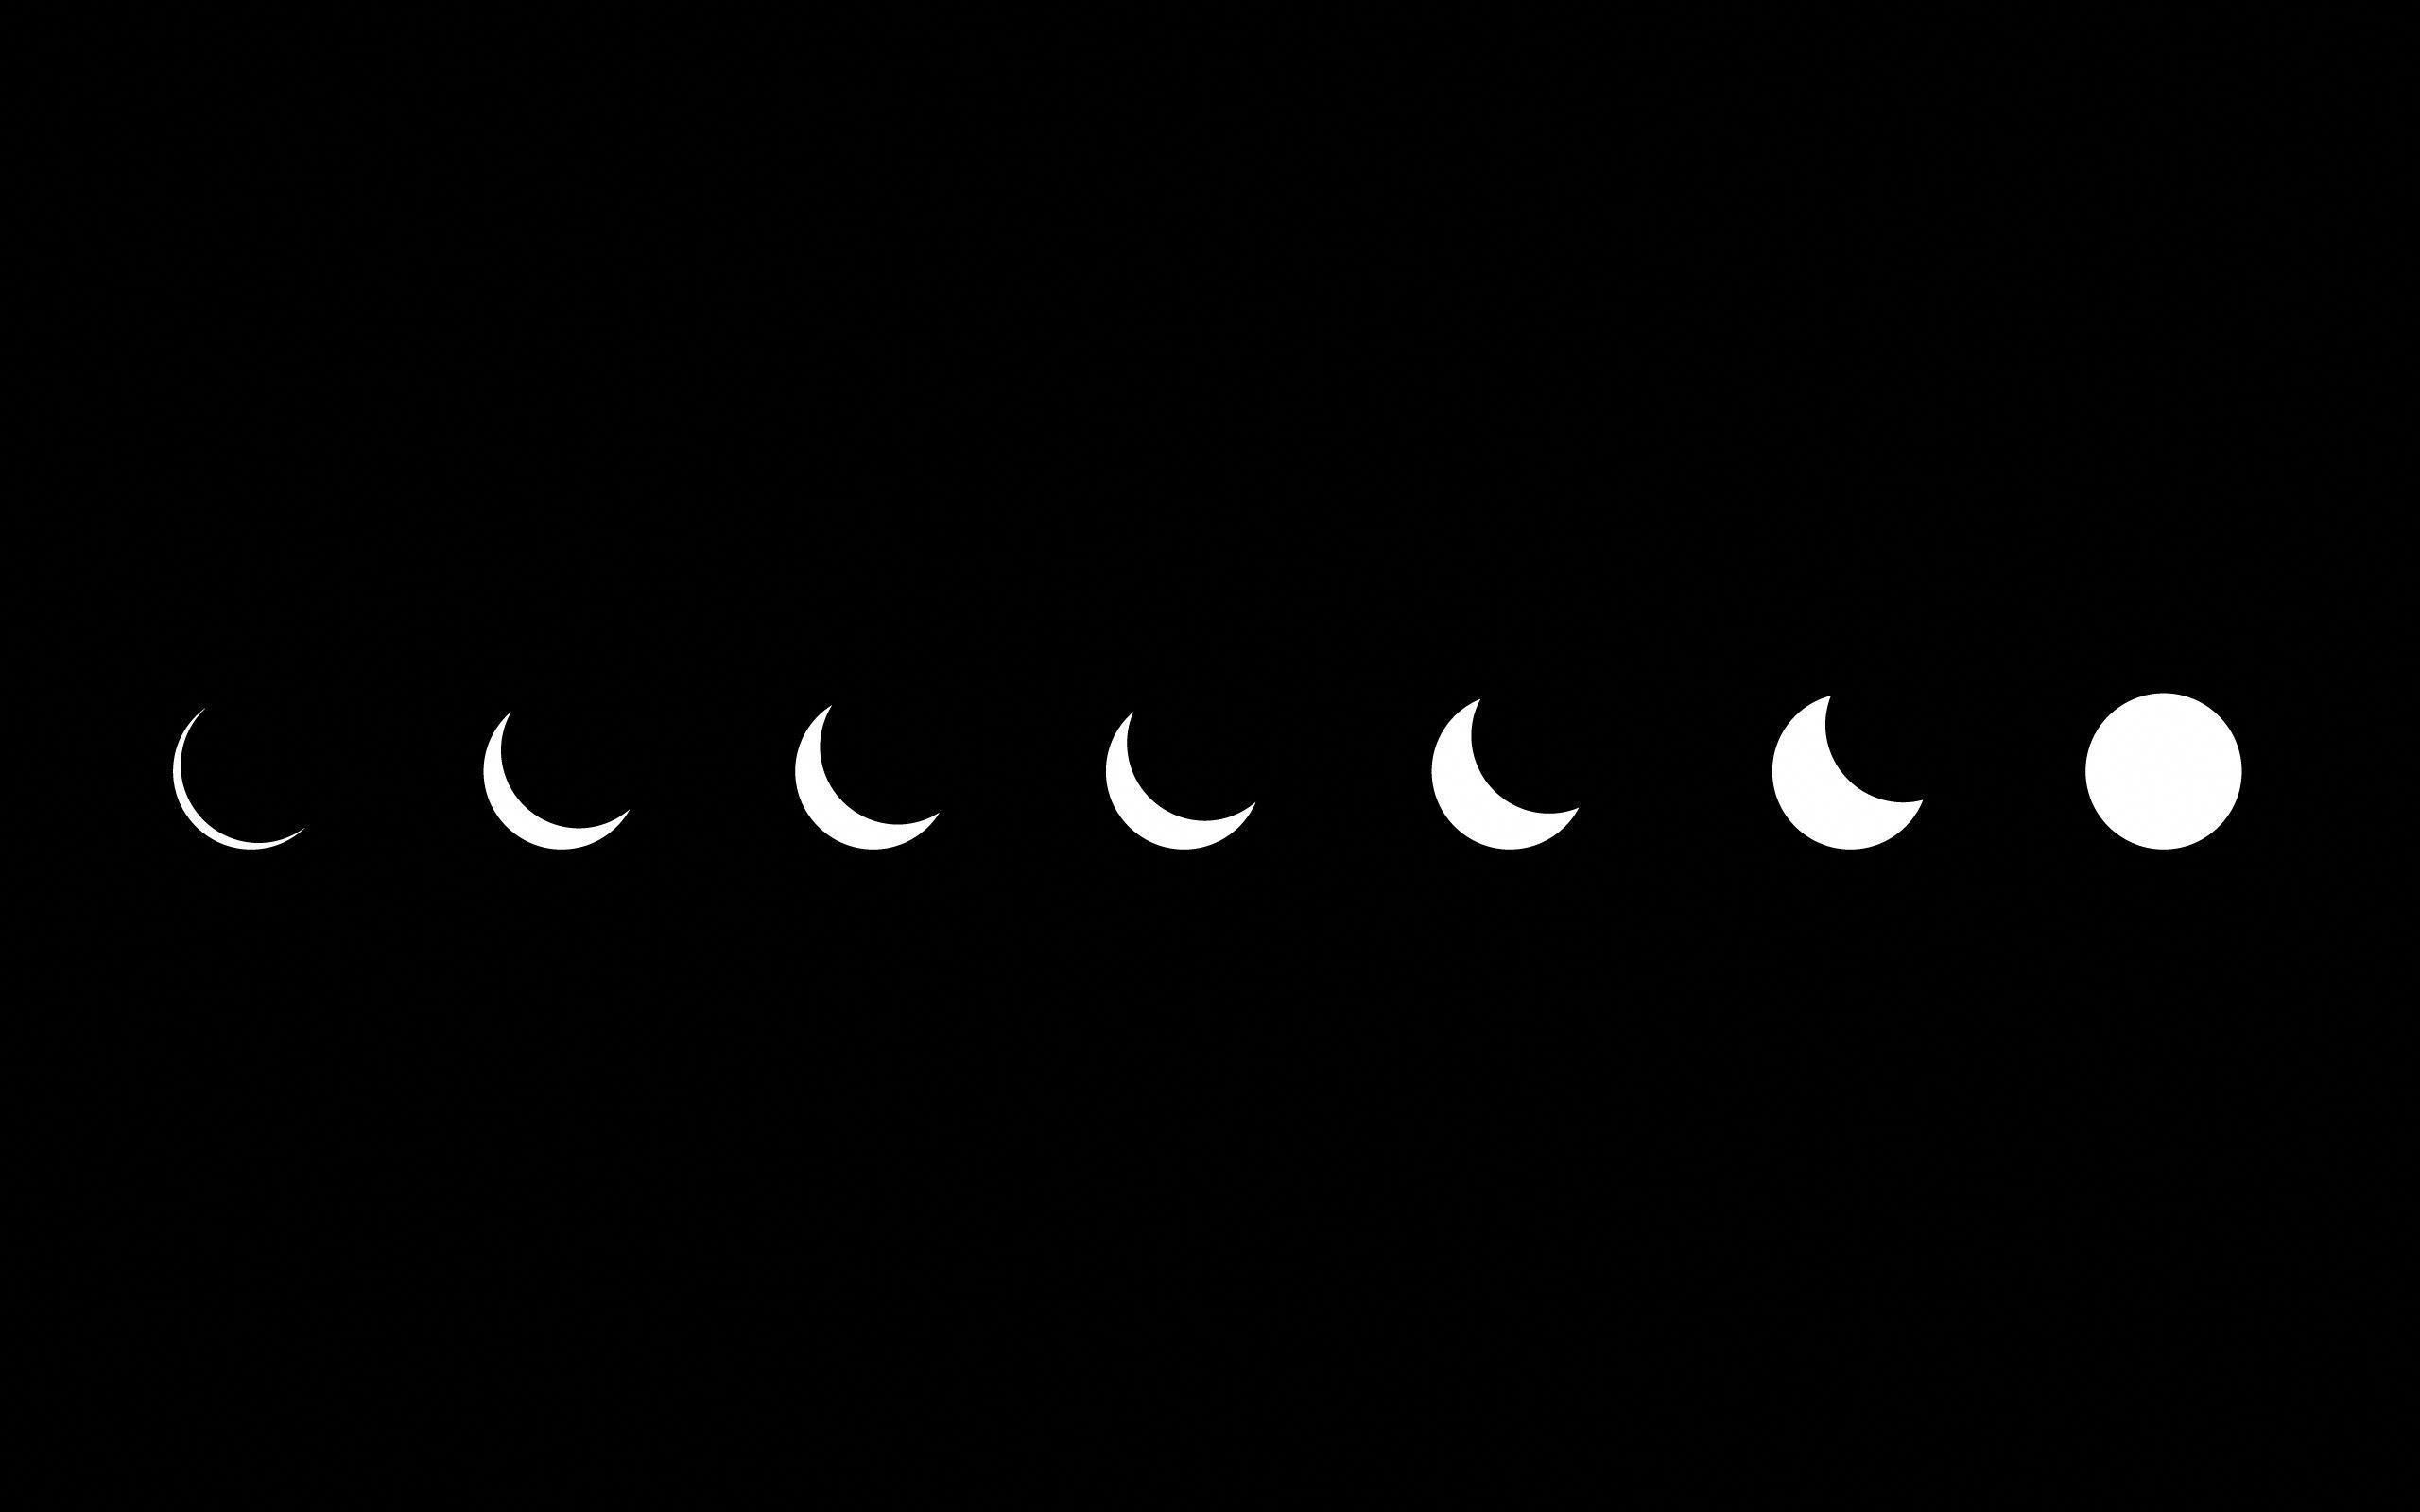 A series of eight white crescent moons on a black background. - Indie